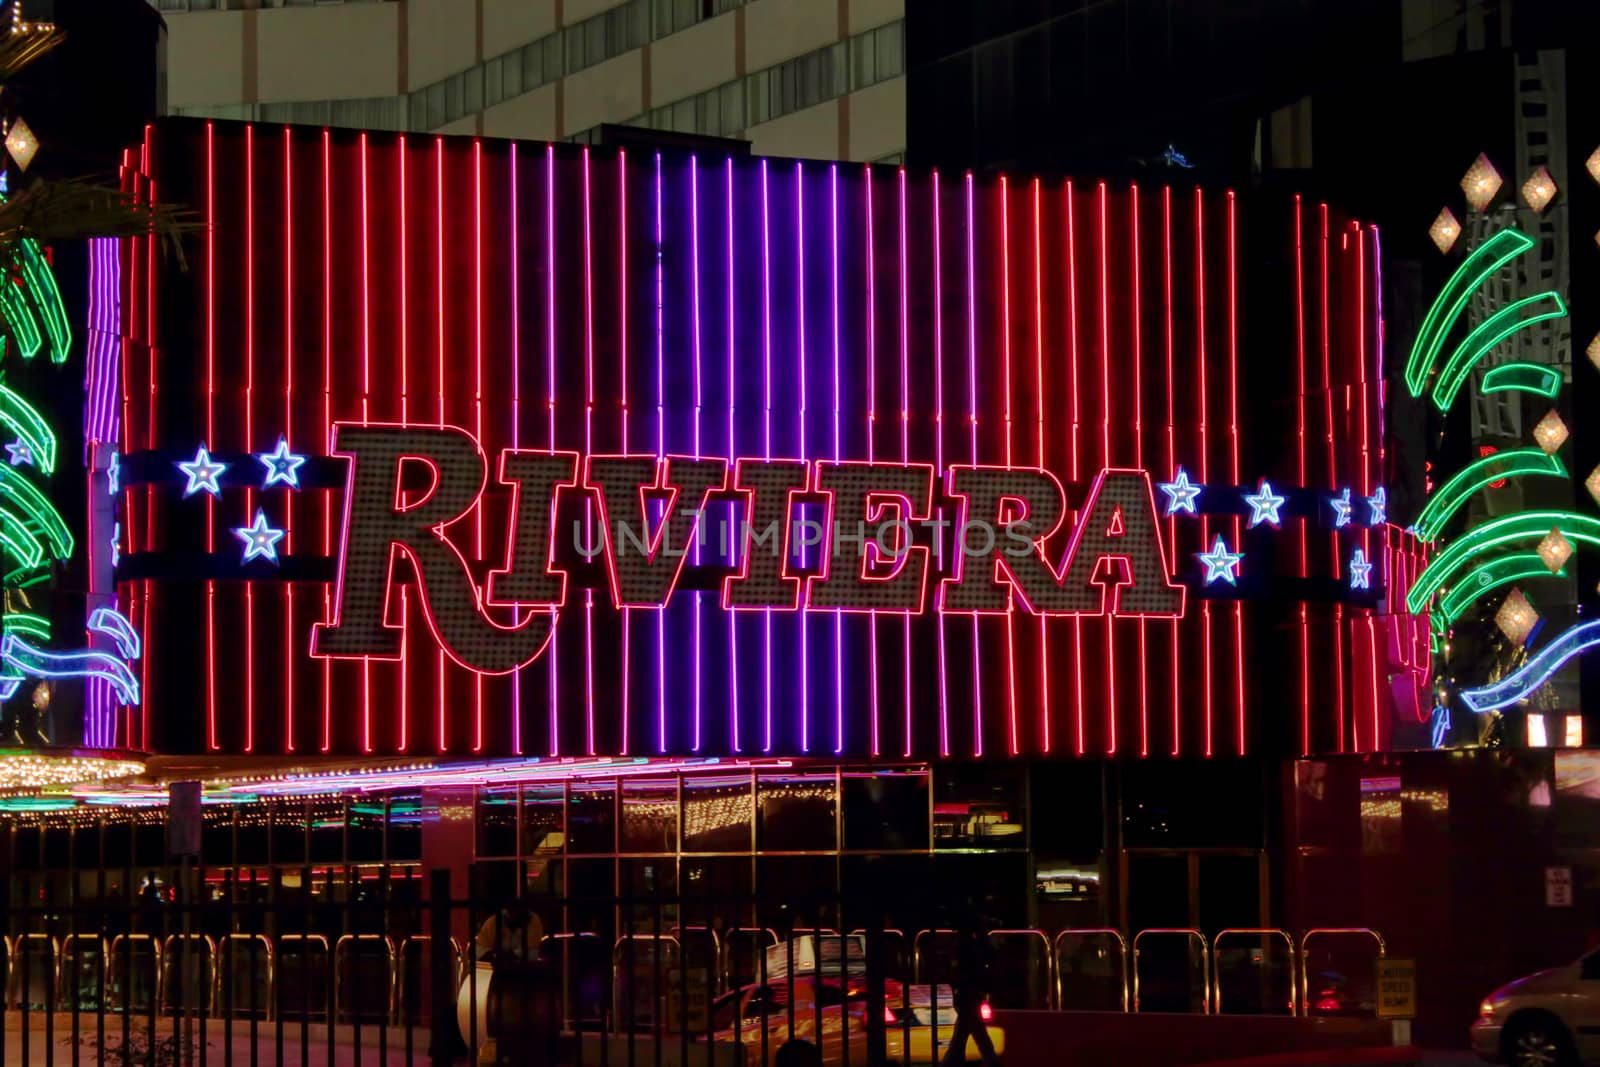 Las Vegas, USA - August 26, 2009: The Riviera Hotel and Casino is one of the first flashy hotel casinos to open on Las Vegas Boulevard in 1955.  Seen here is the brightly decorated sign near the main entrance to the building.